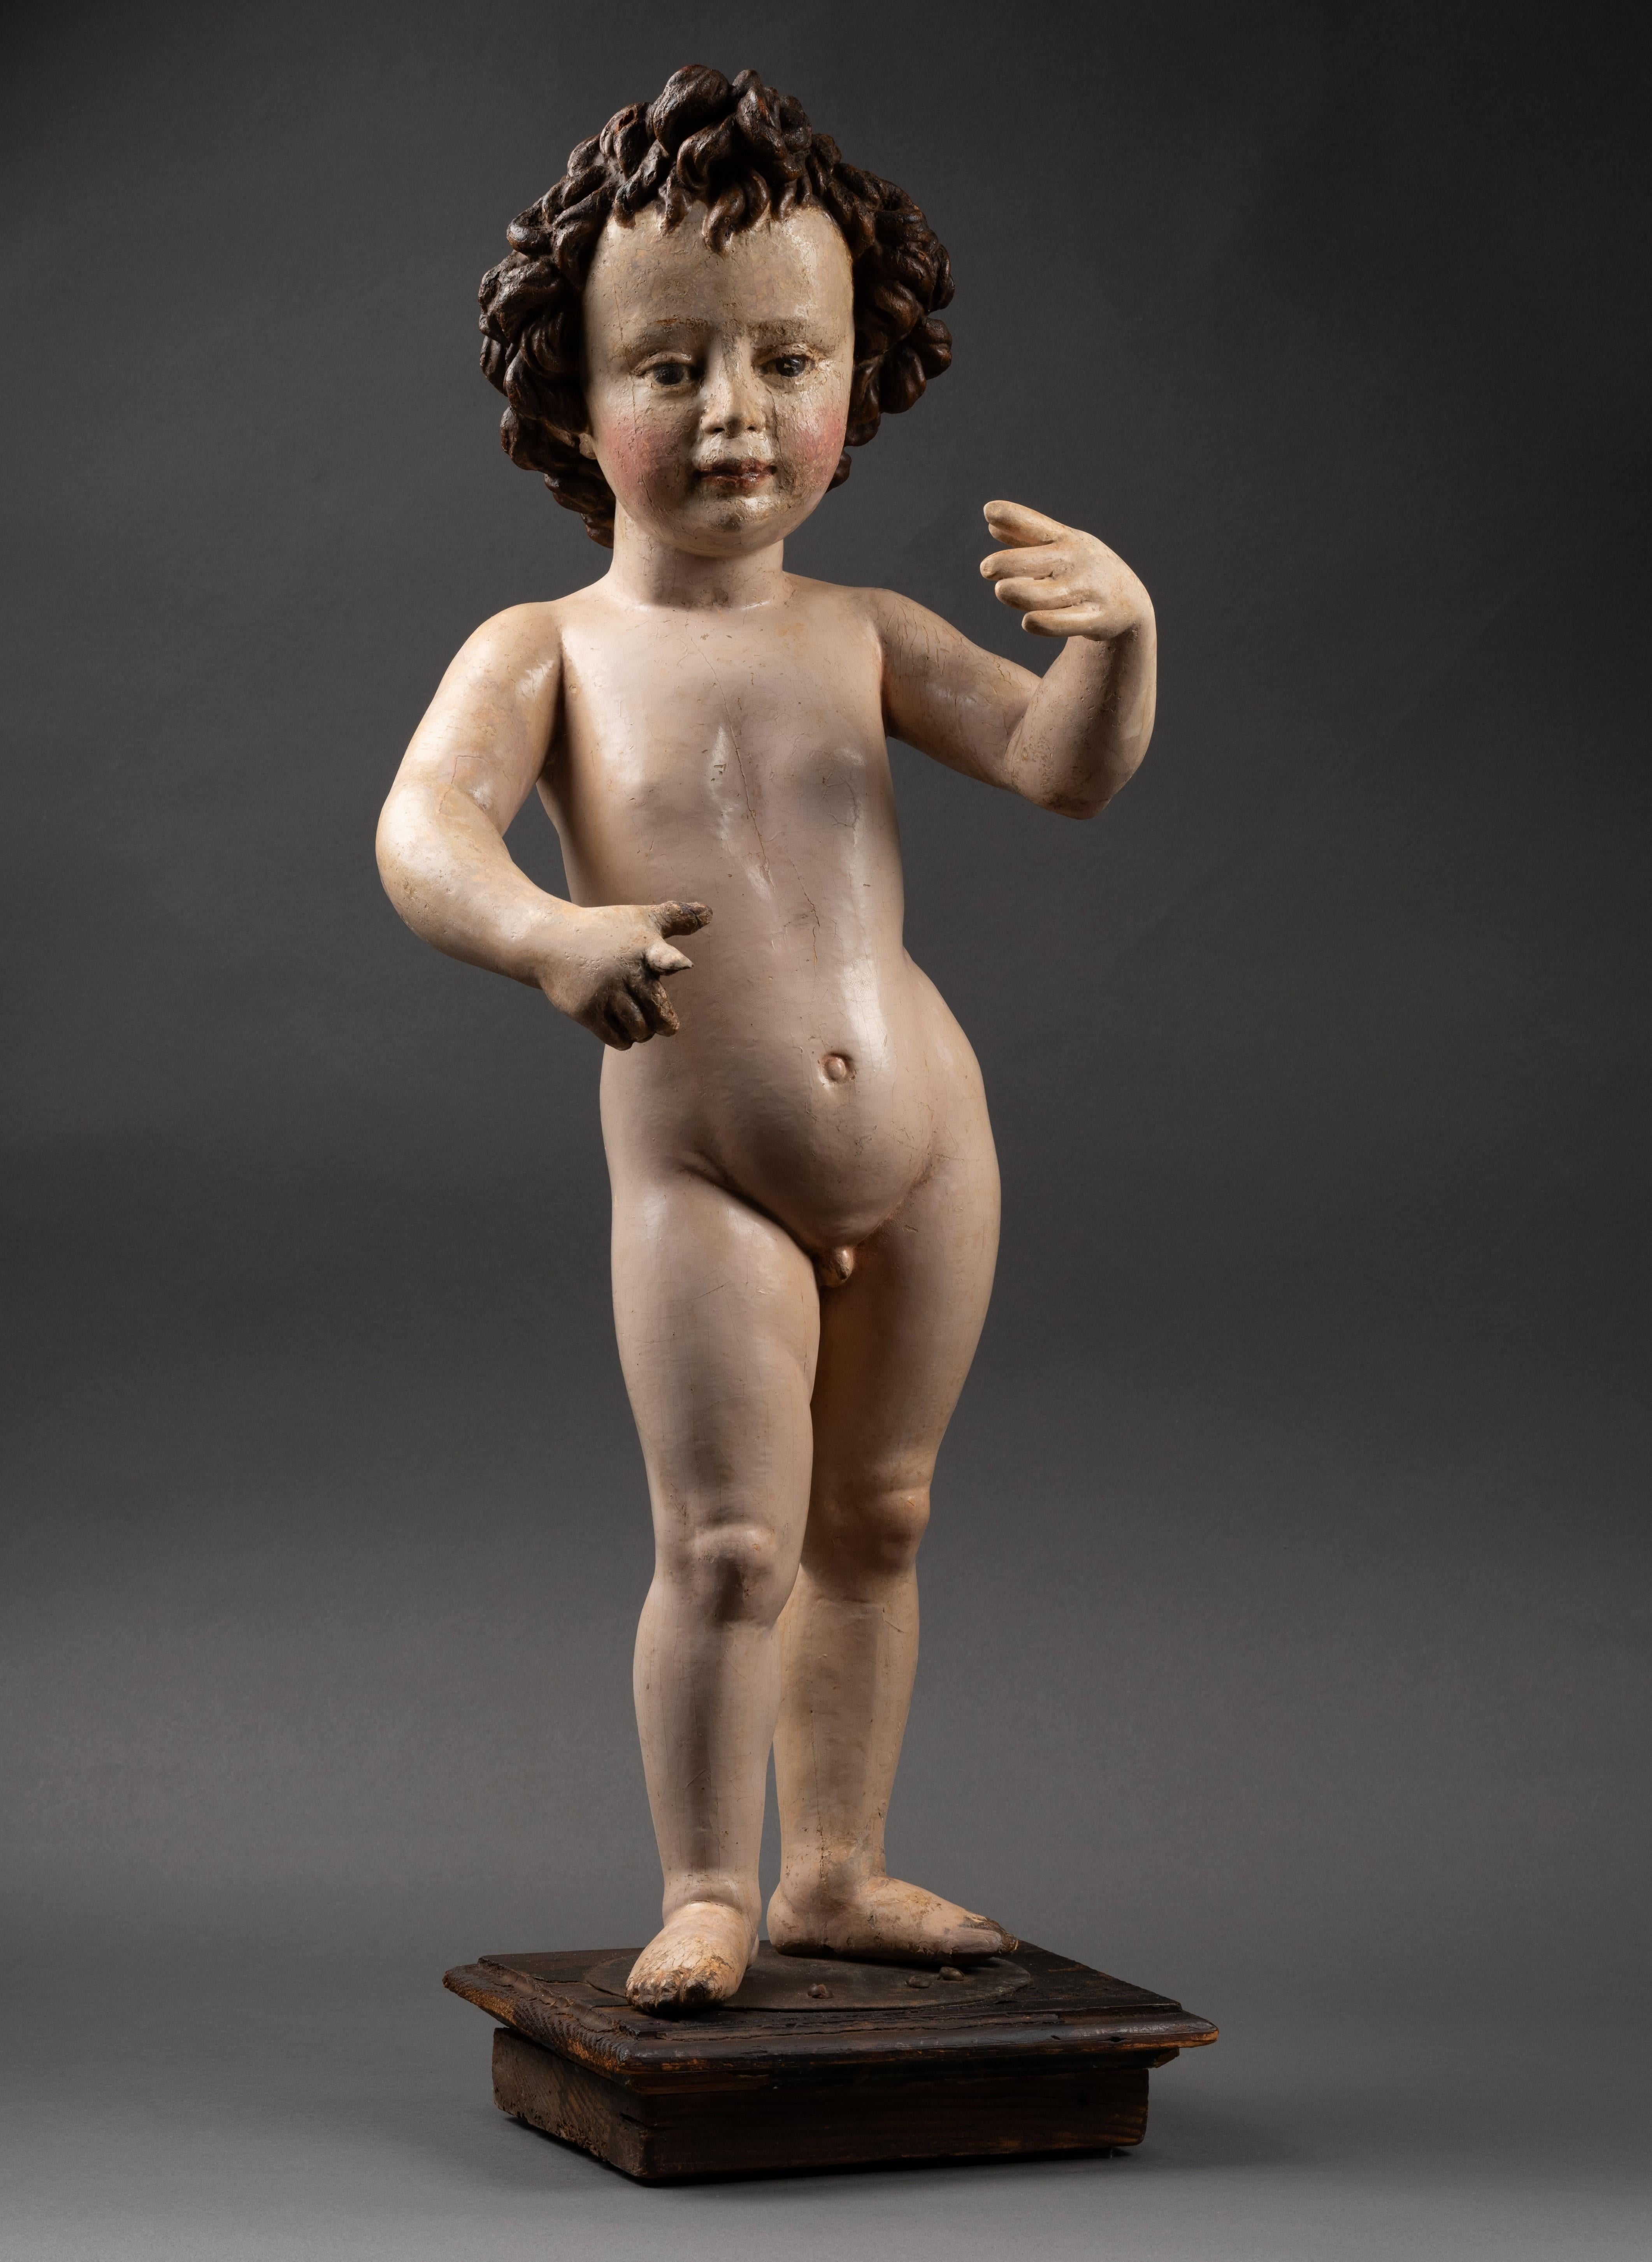 The Infant St John the Baptist,
A first half of 17th century Sevillian School
Cercle of Juan de Mesa Velasco (Córdoba, 1583 - Séville, 1627)
Polychrome and carved wood
Height: 65 cm

This charming, intricately carved polychrome wooden statue finds